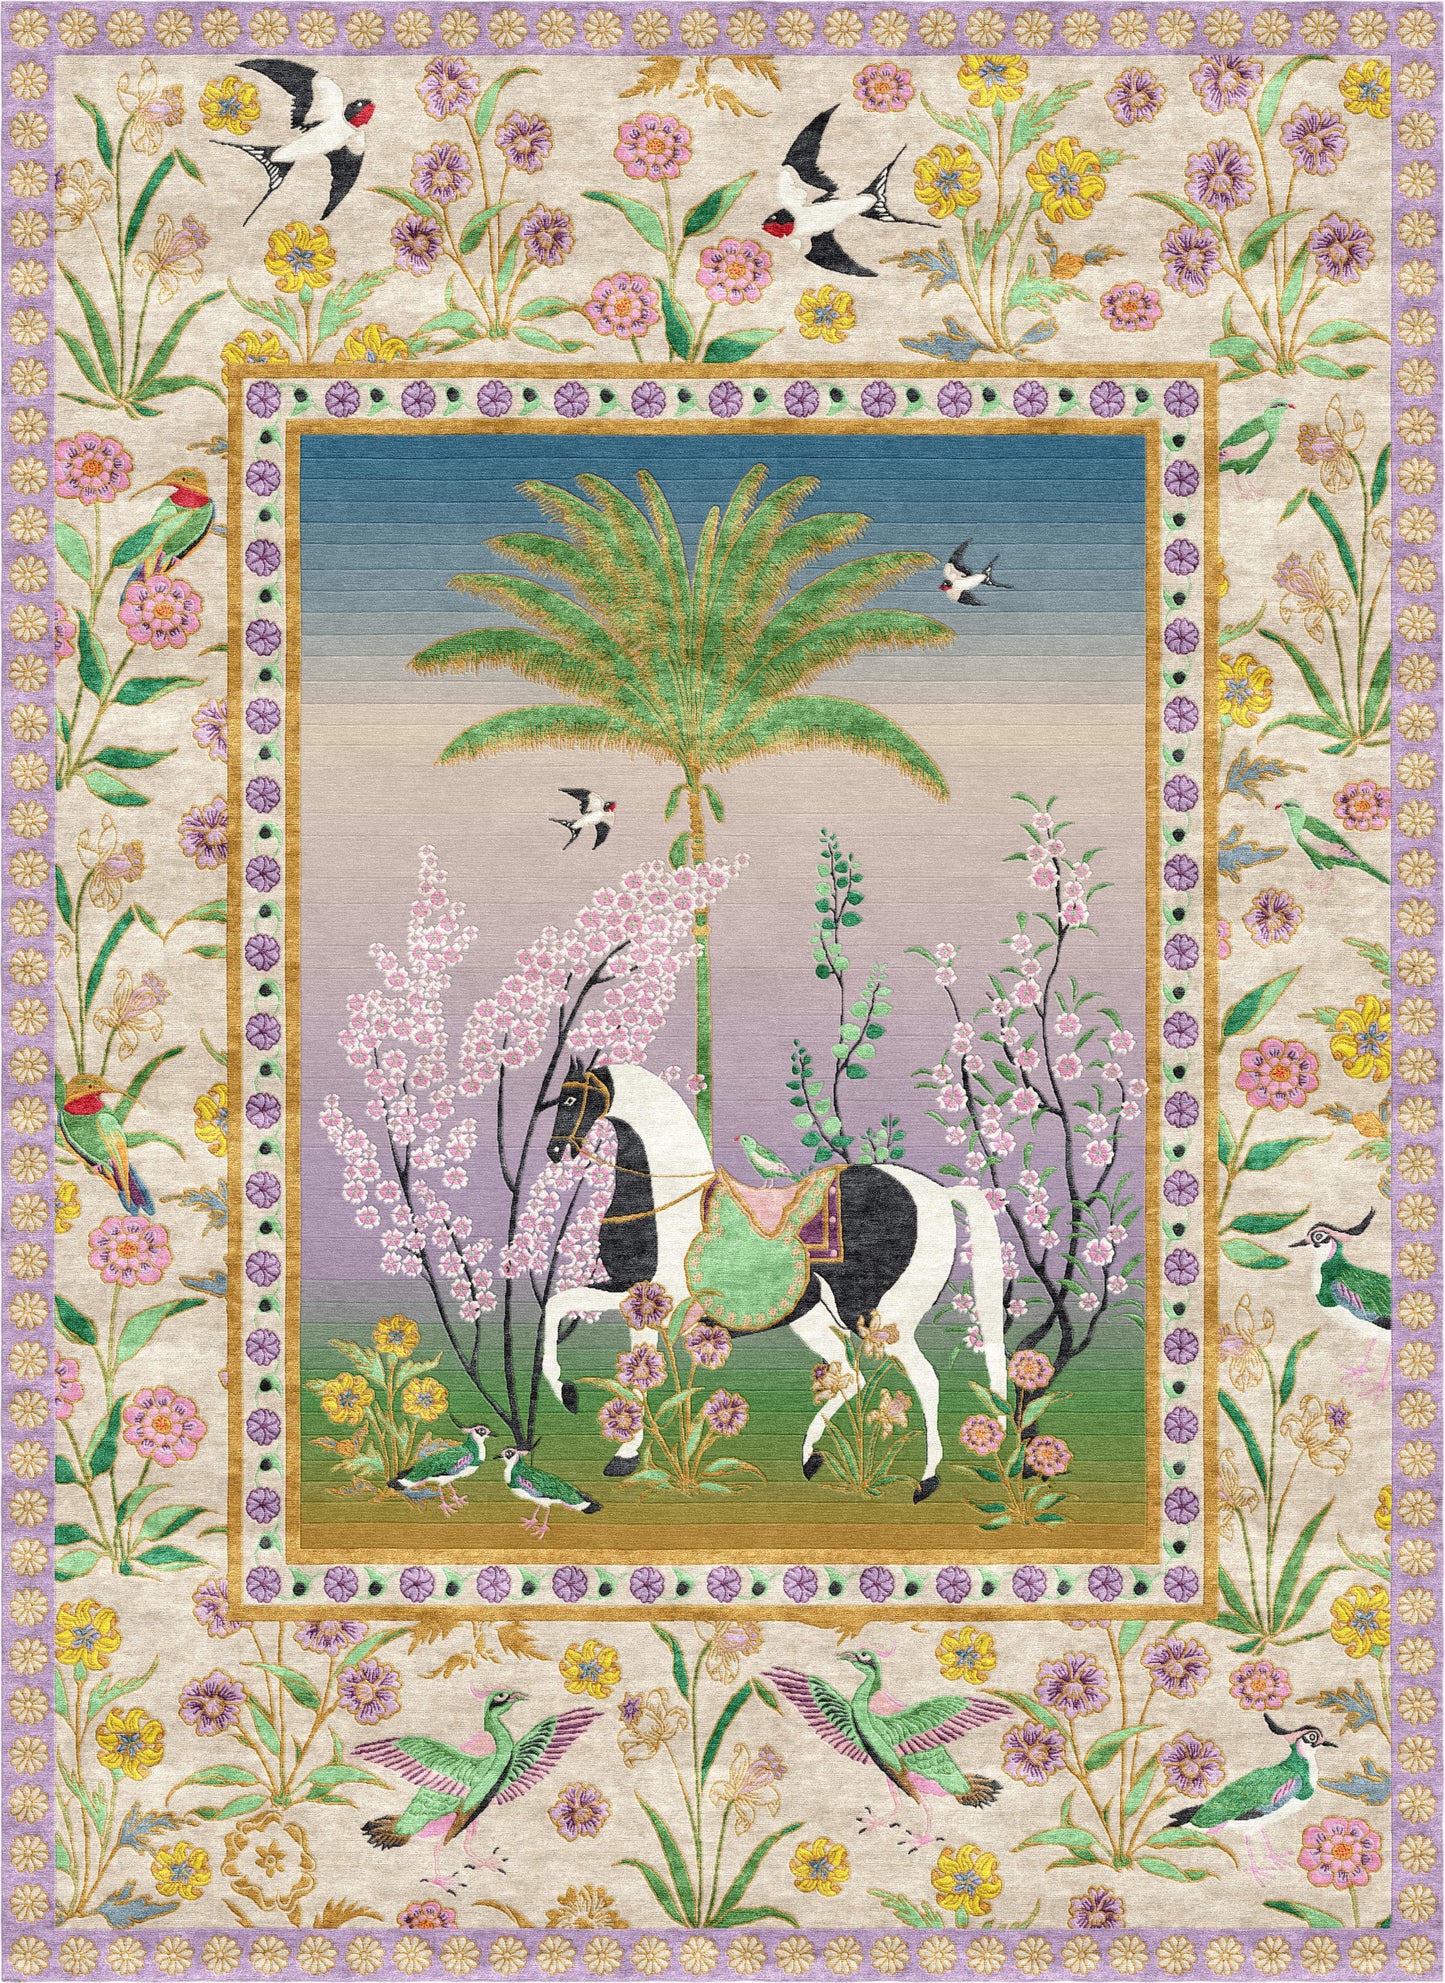 A Mughal Painting - Hand Knotted Rug - Sample